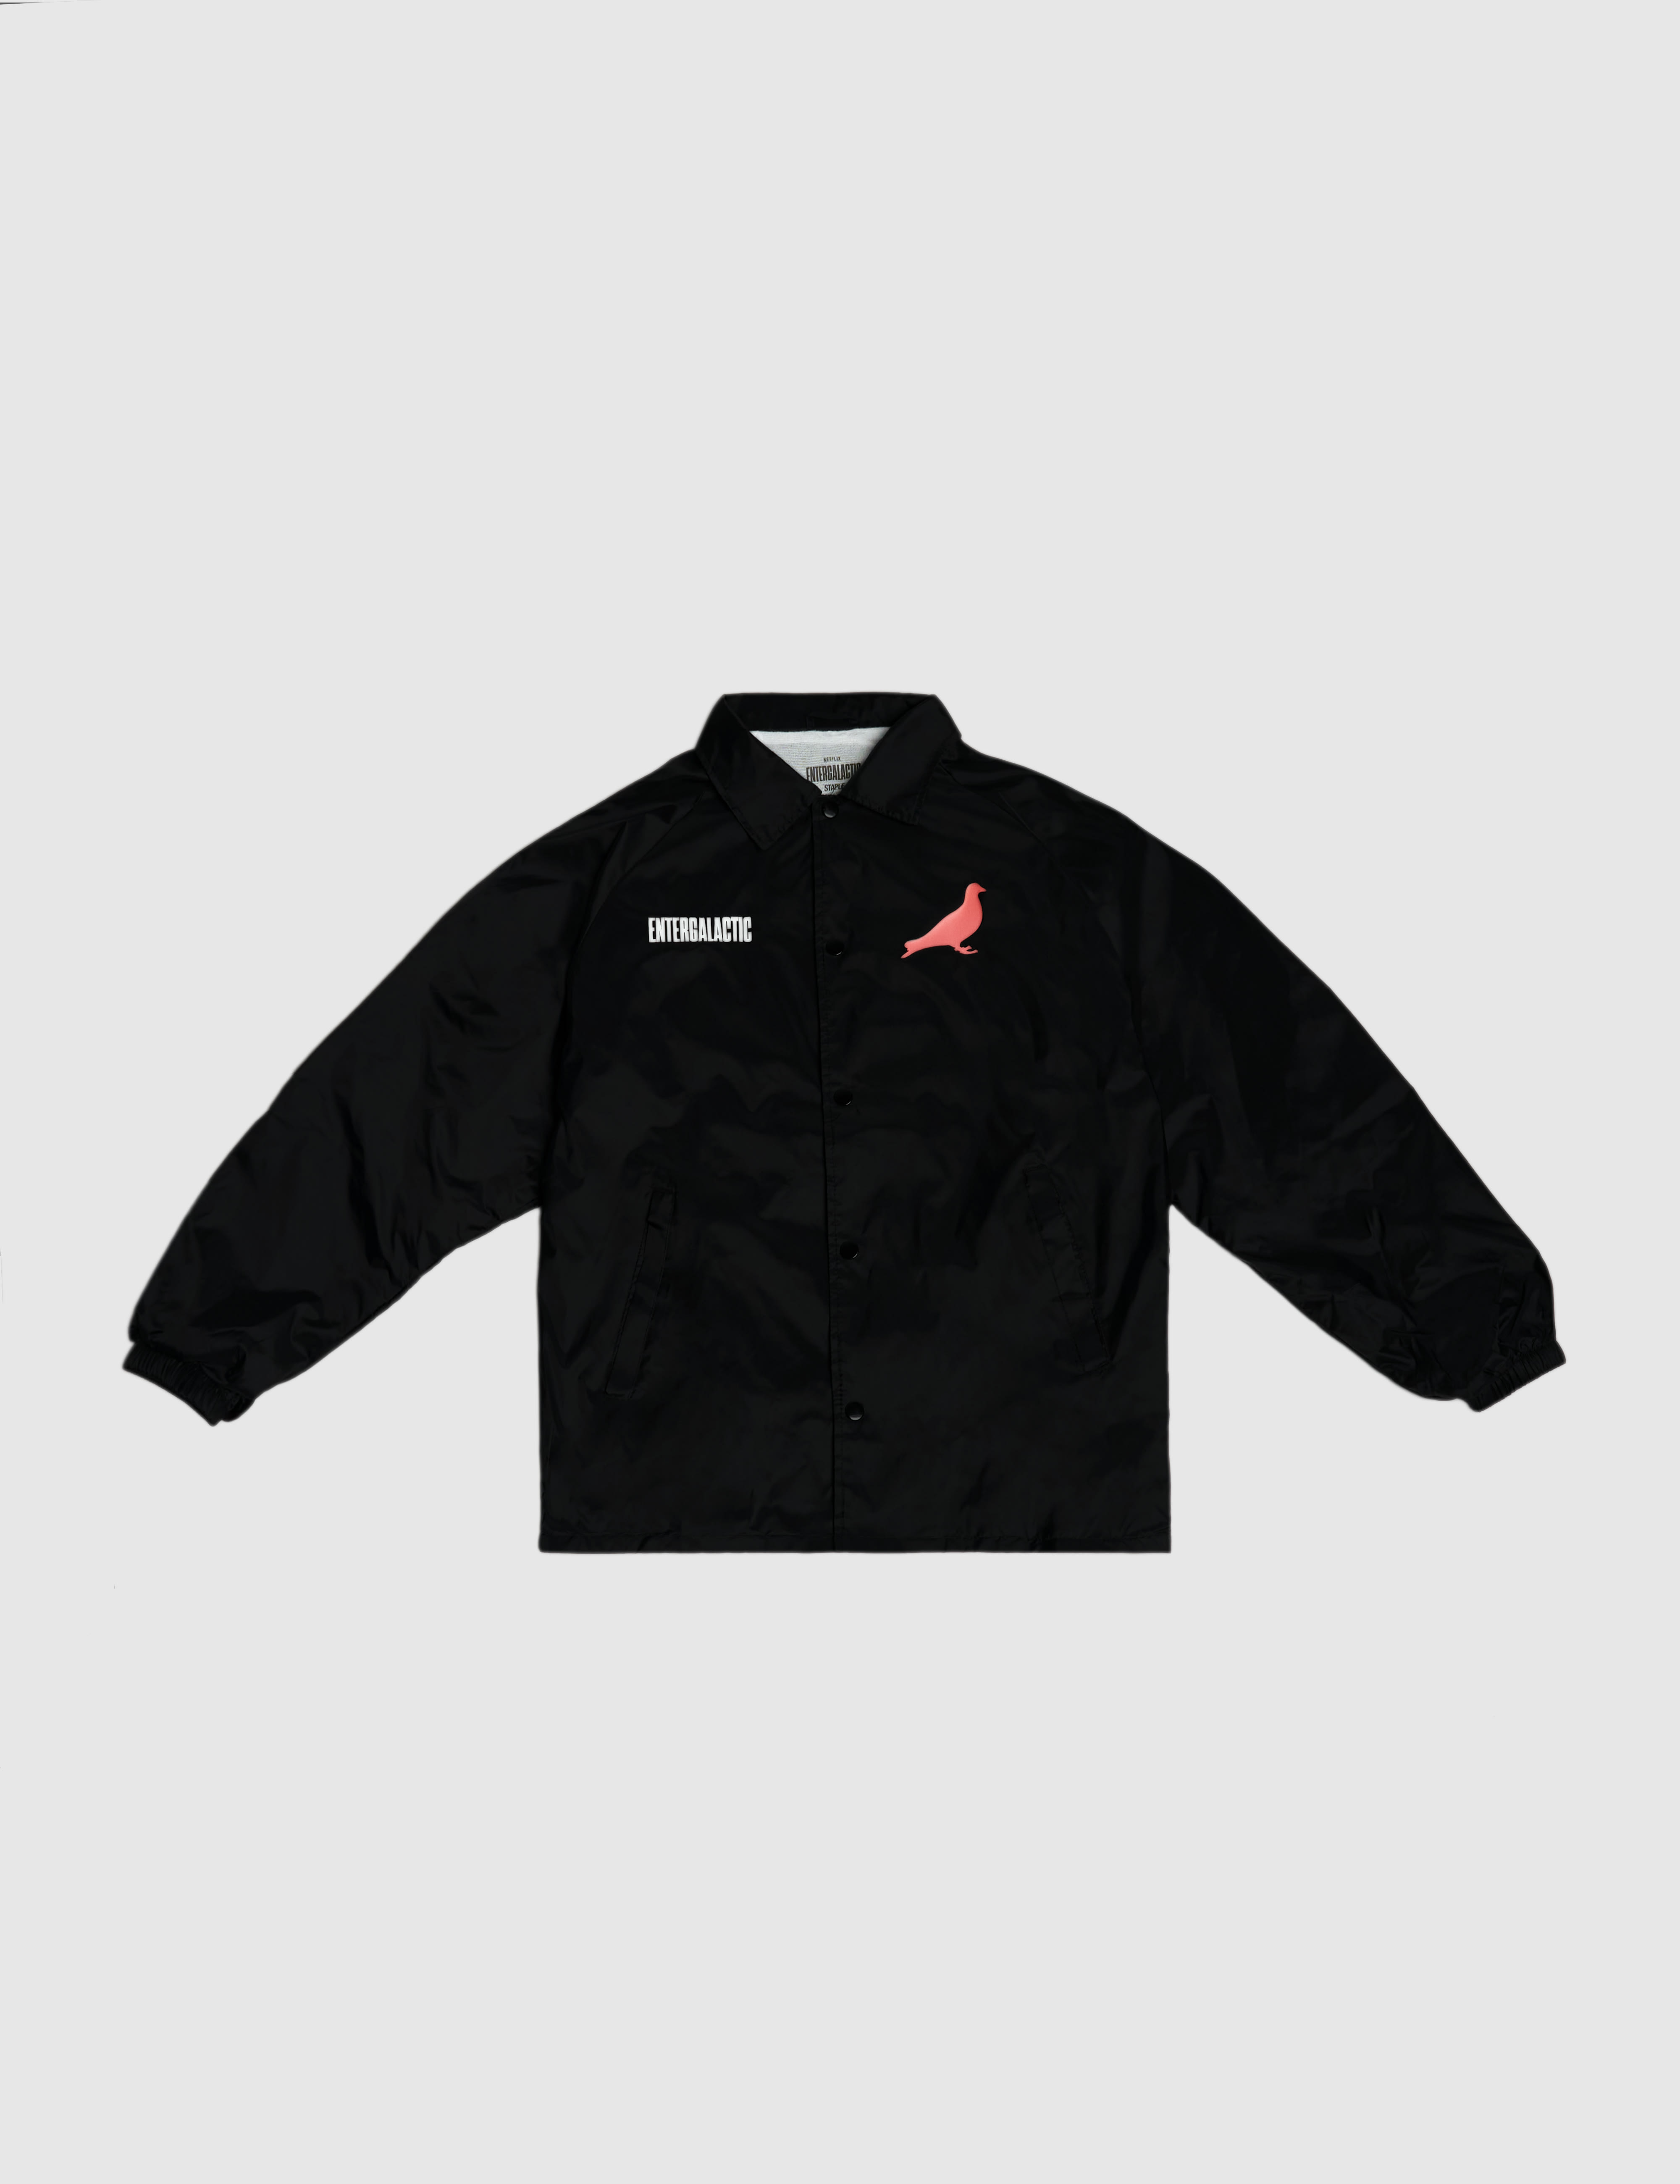 A Staple jacket is pictured